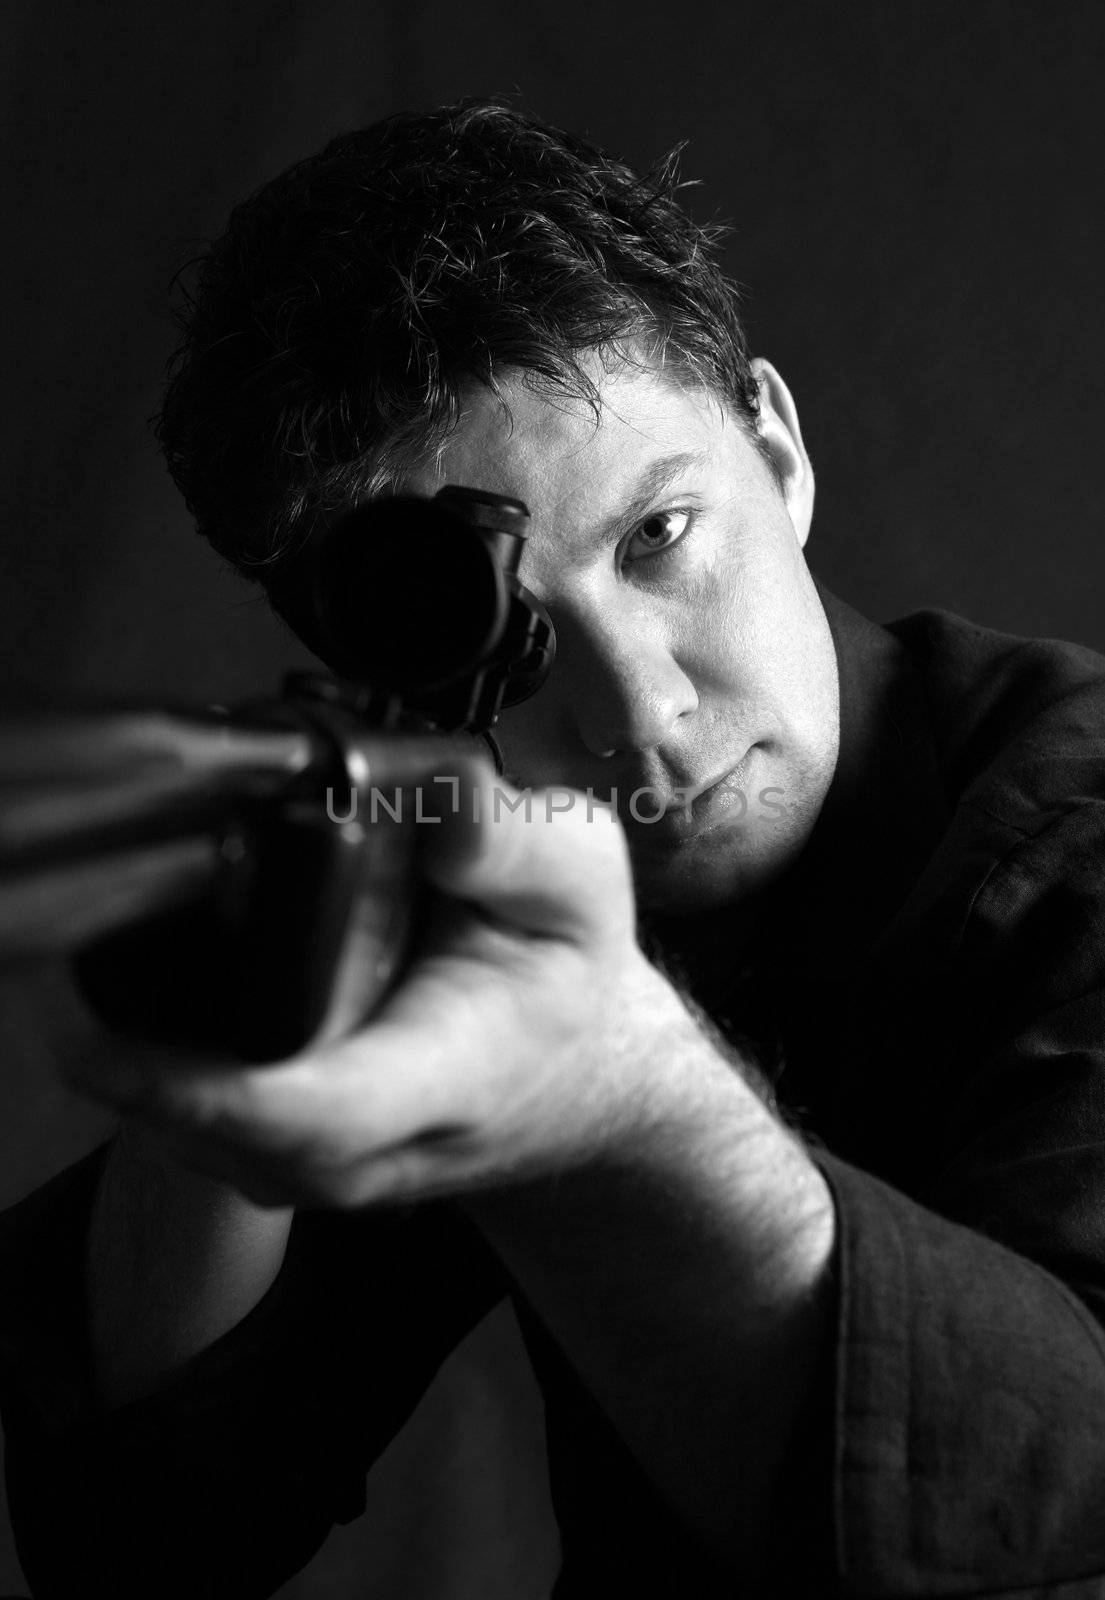 The man with the weapon in studio on a black background